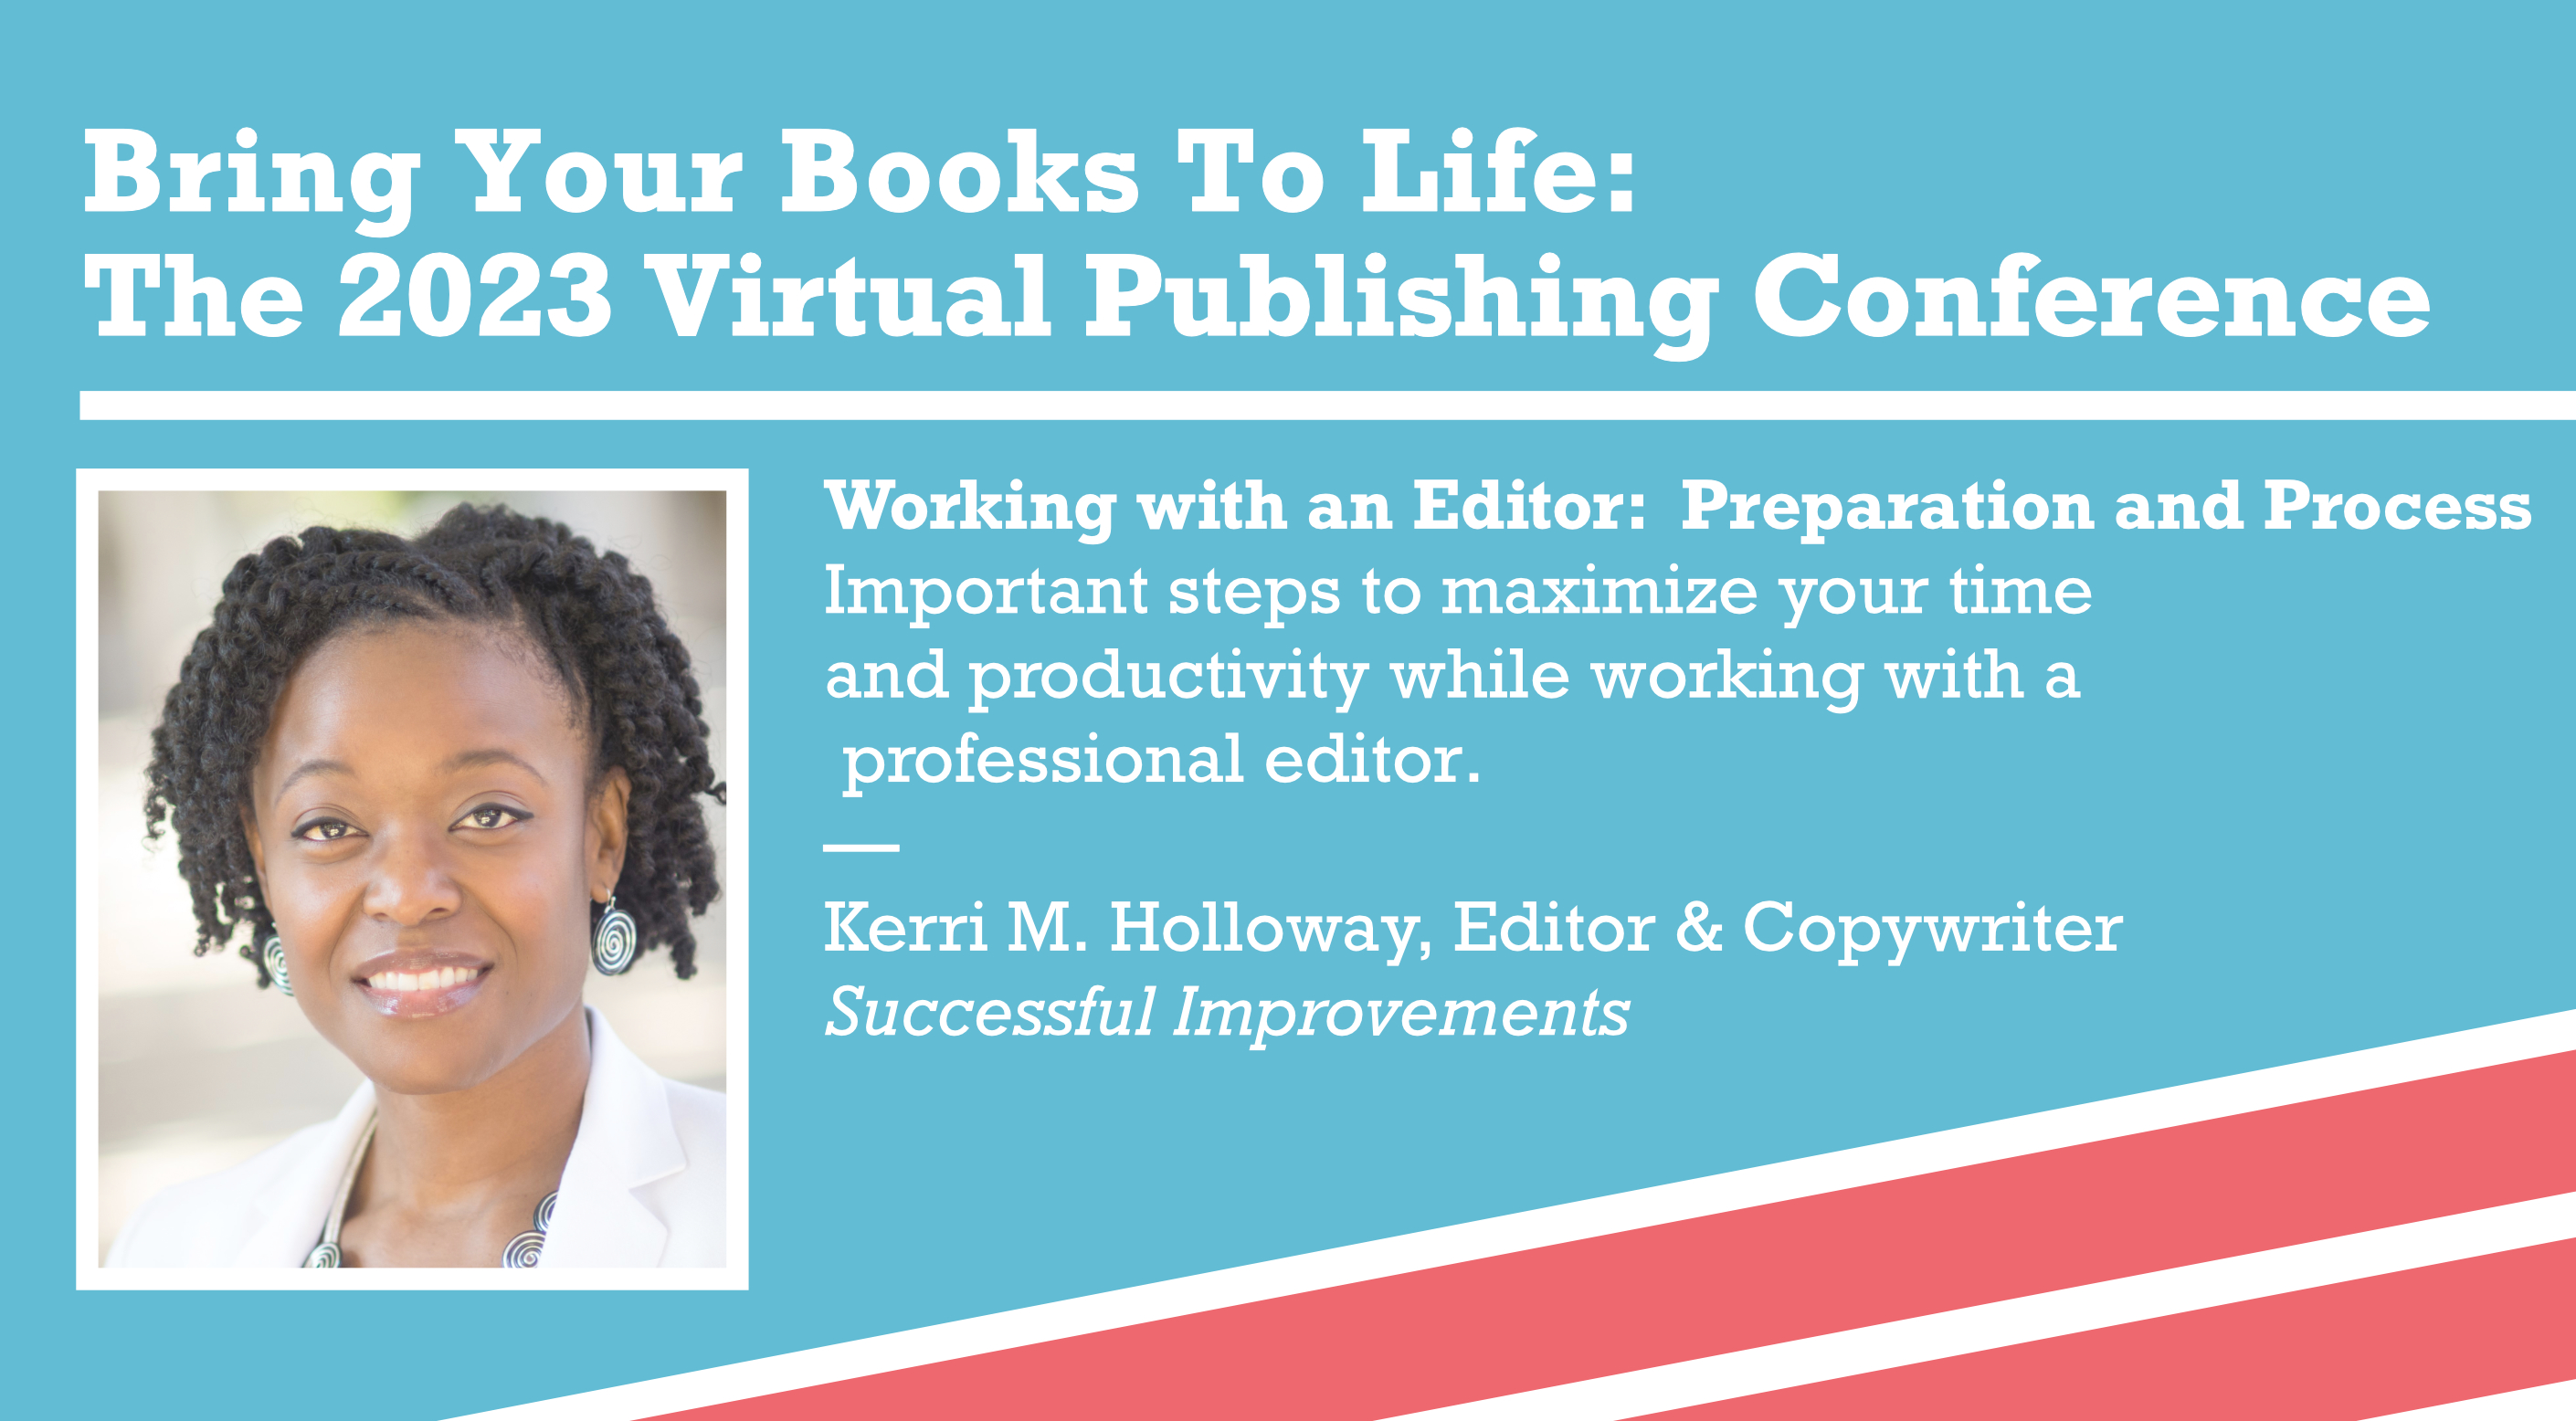 Working with an Editor: Preparation and Process — Important steps to maximize your time and productivity while working with a professional editor. —Kerri M. Holloway, Editor and Copywriter, Successful Improvements